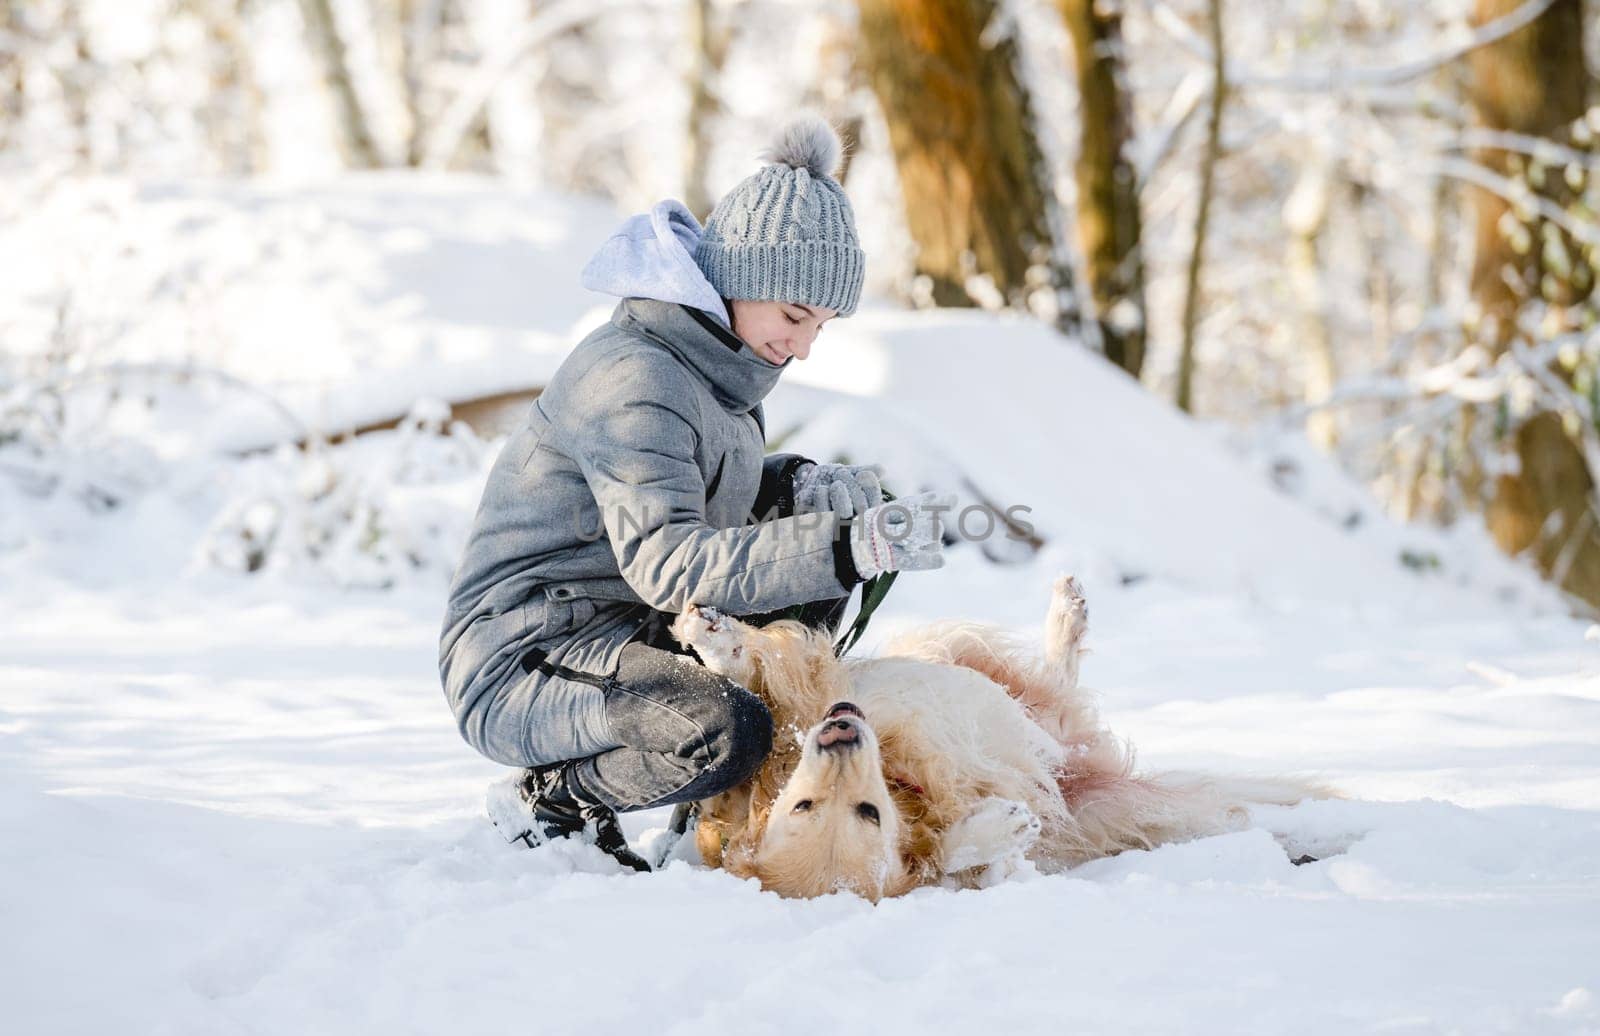 Teenage Girl Plays With Golden Retriever In Winter Forest by tan4ikk1